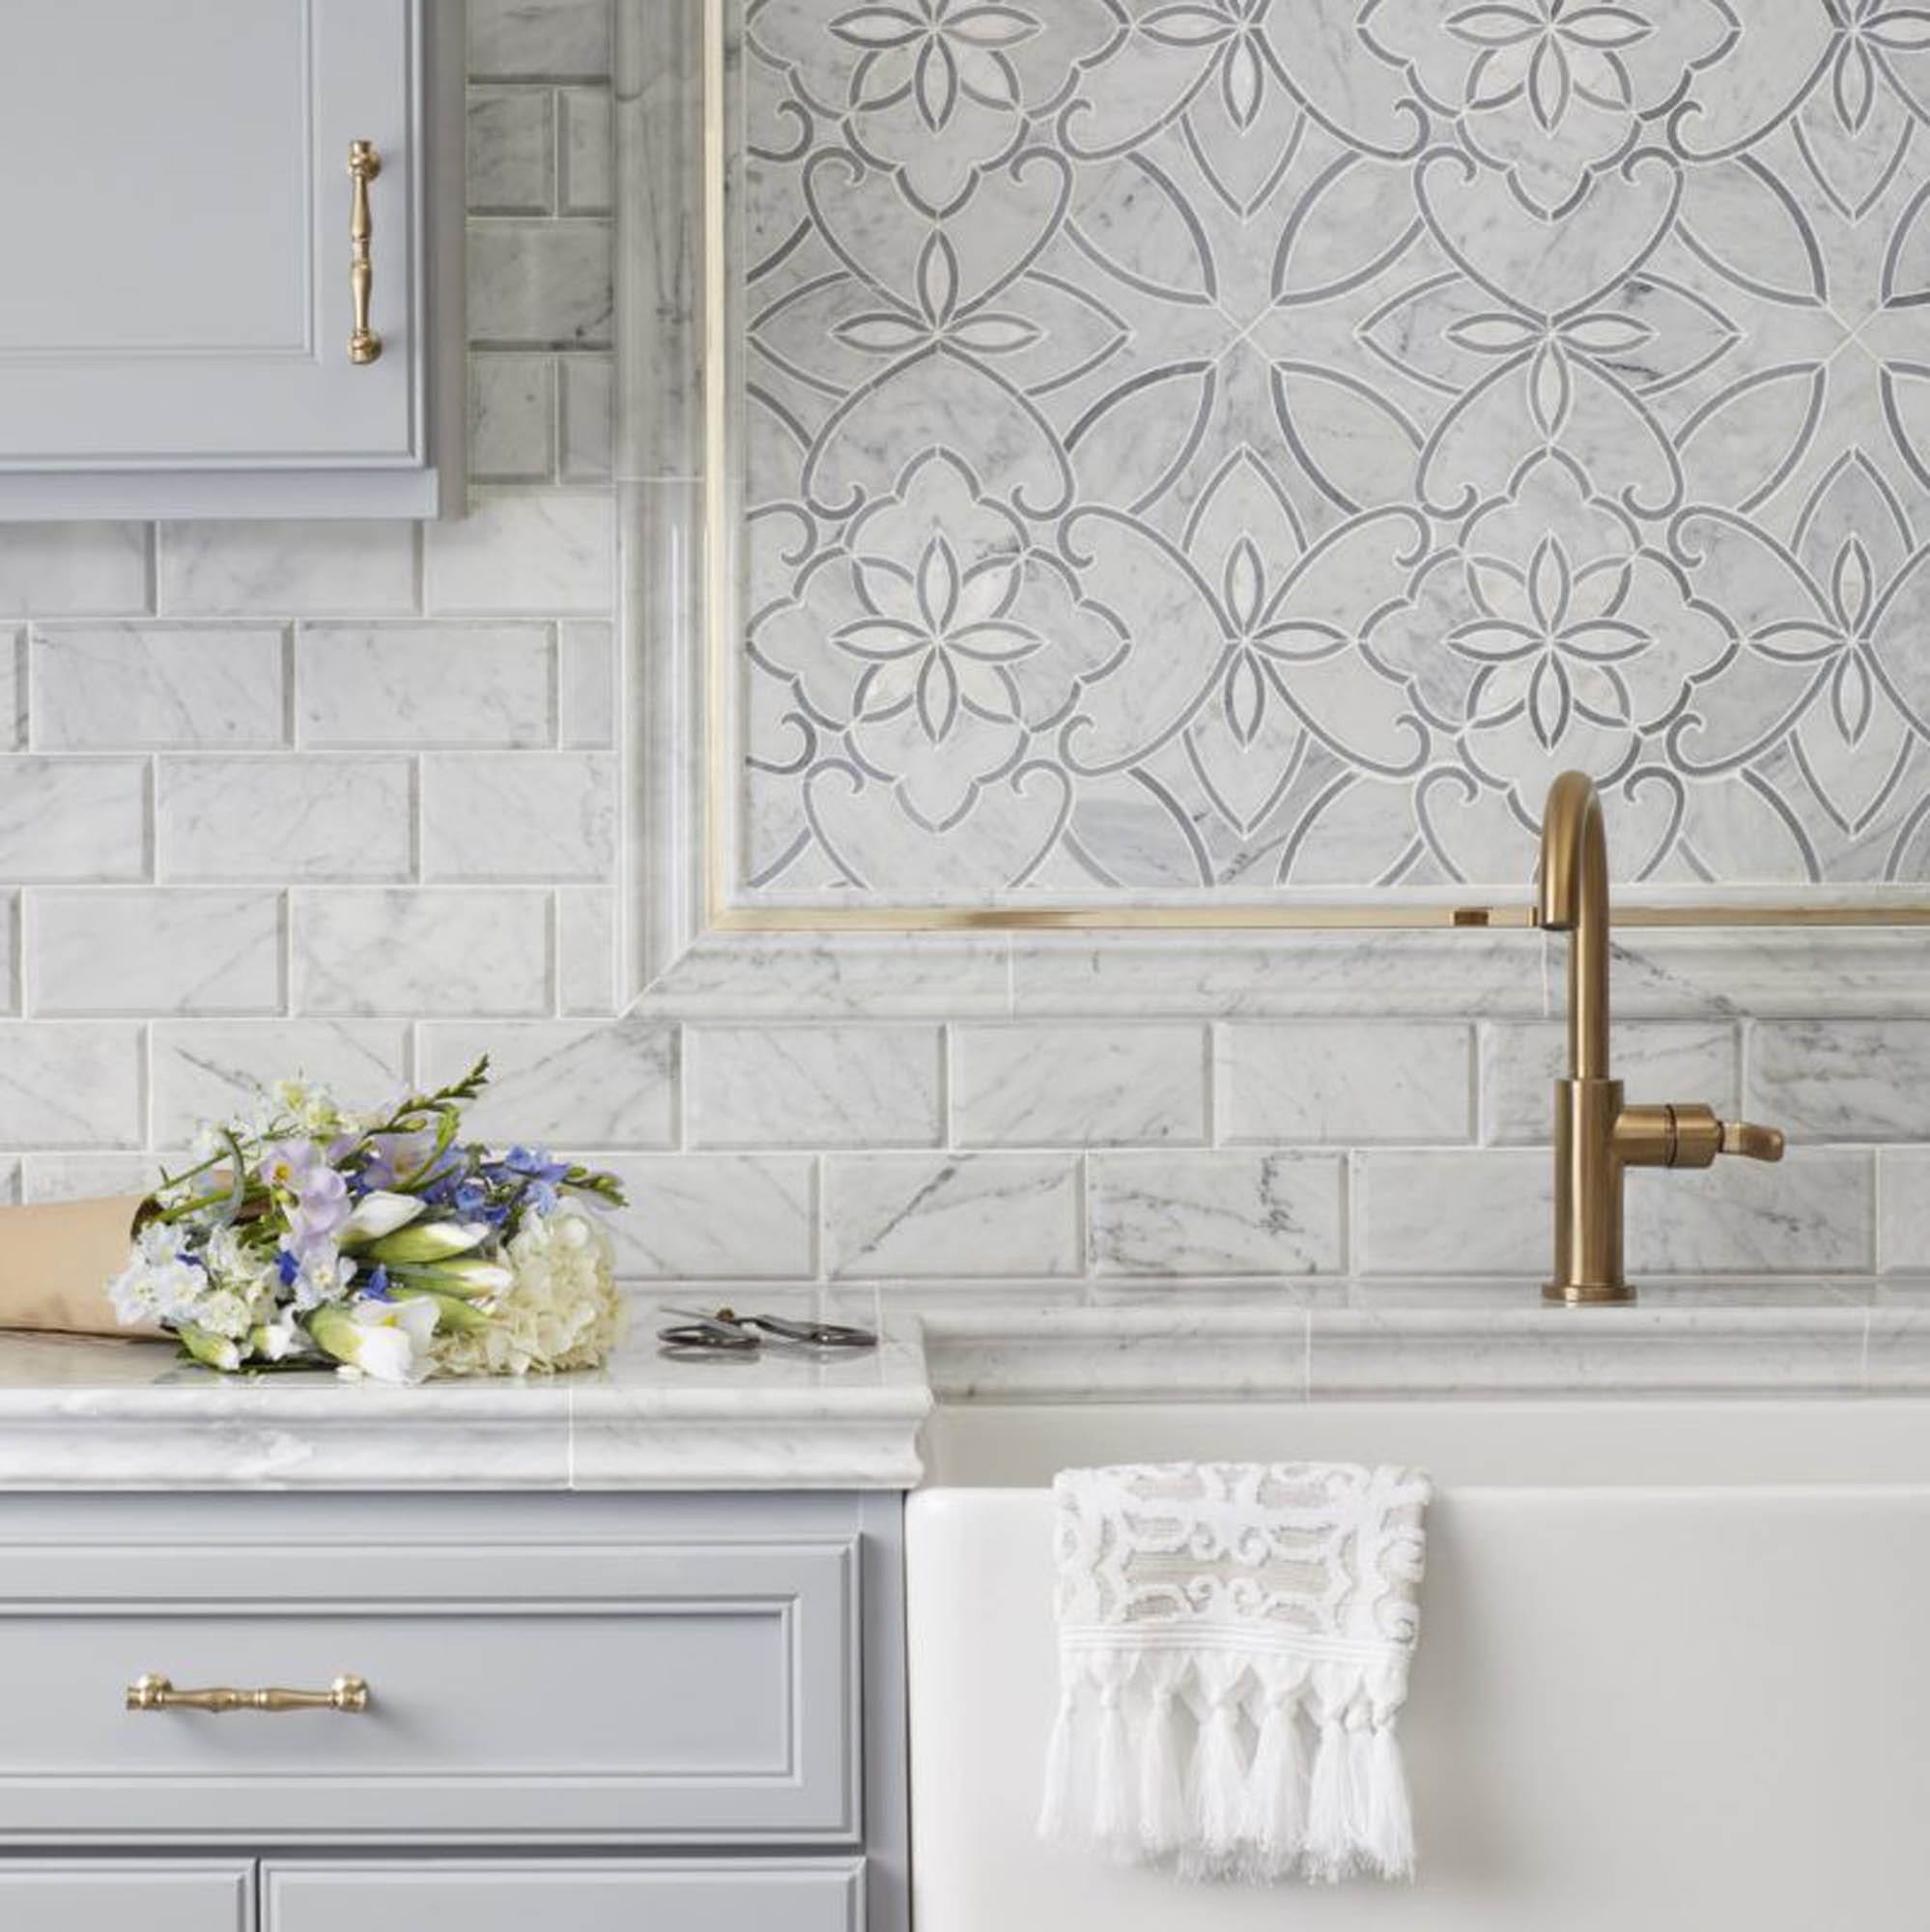 Subway tile with mosaic kitchen